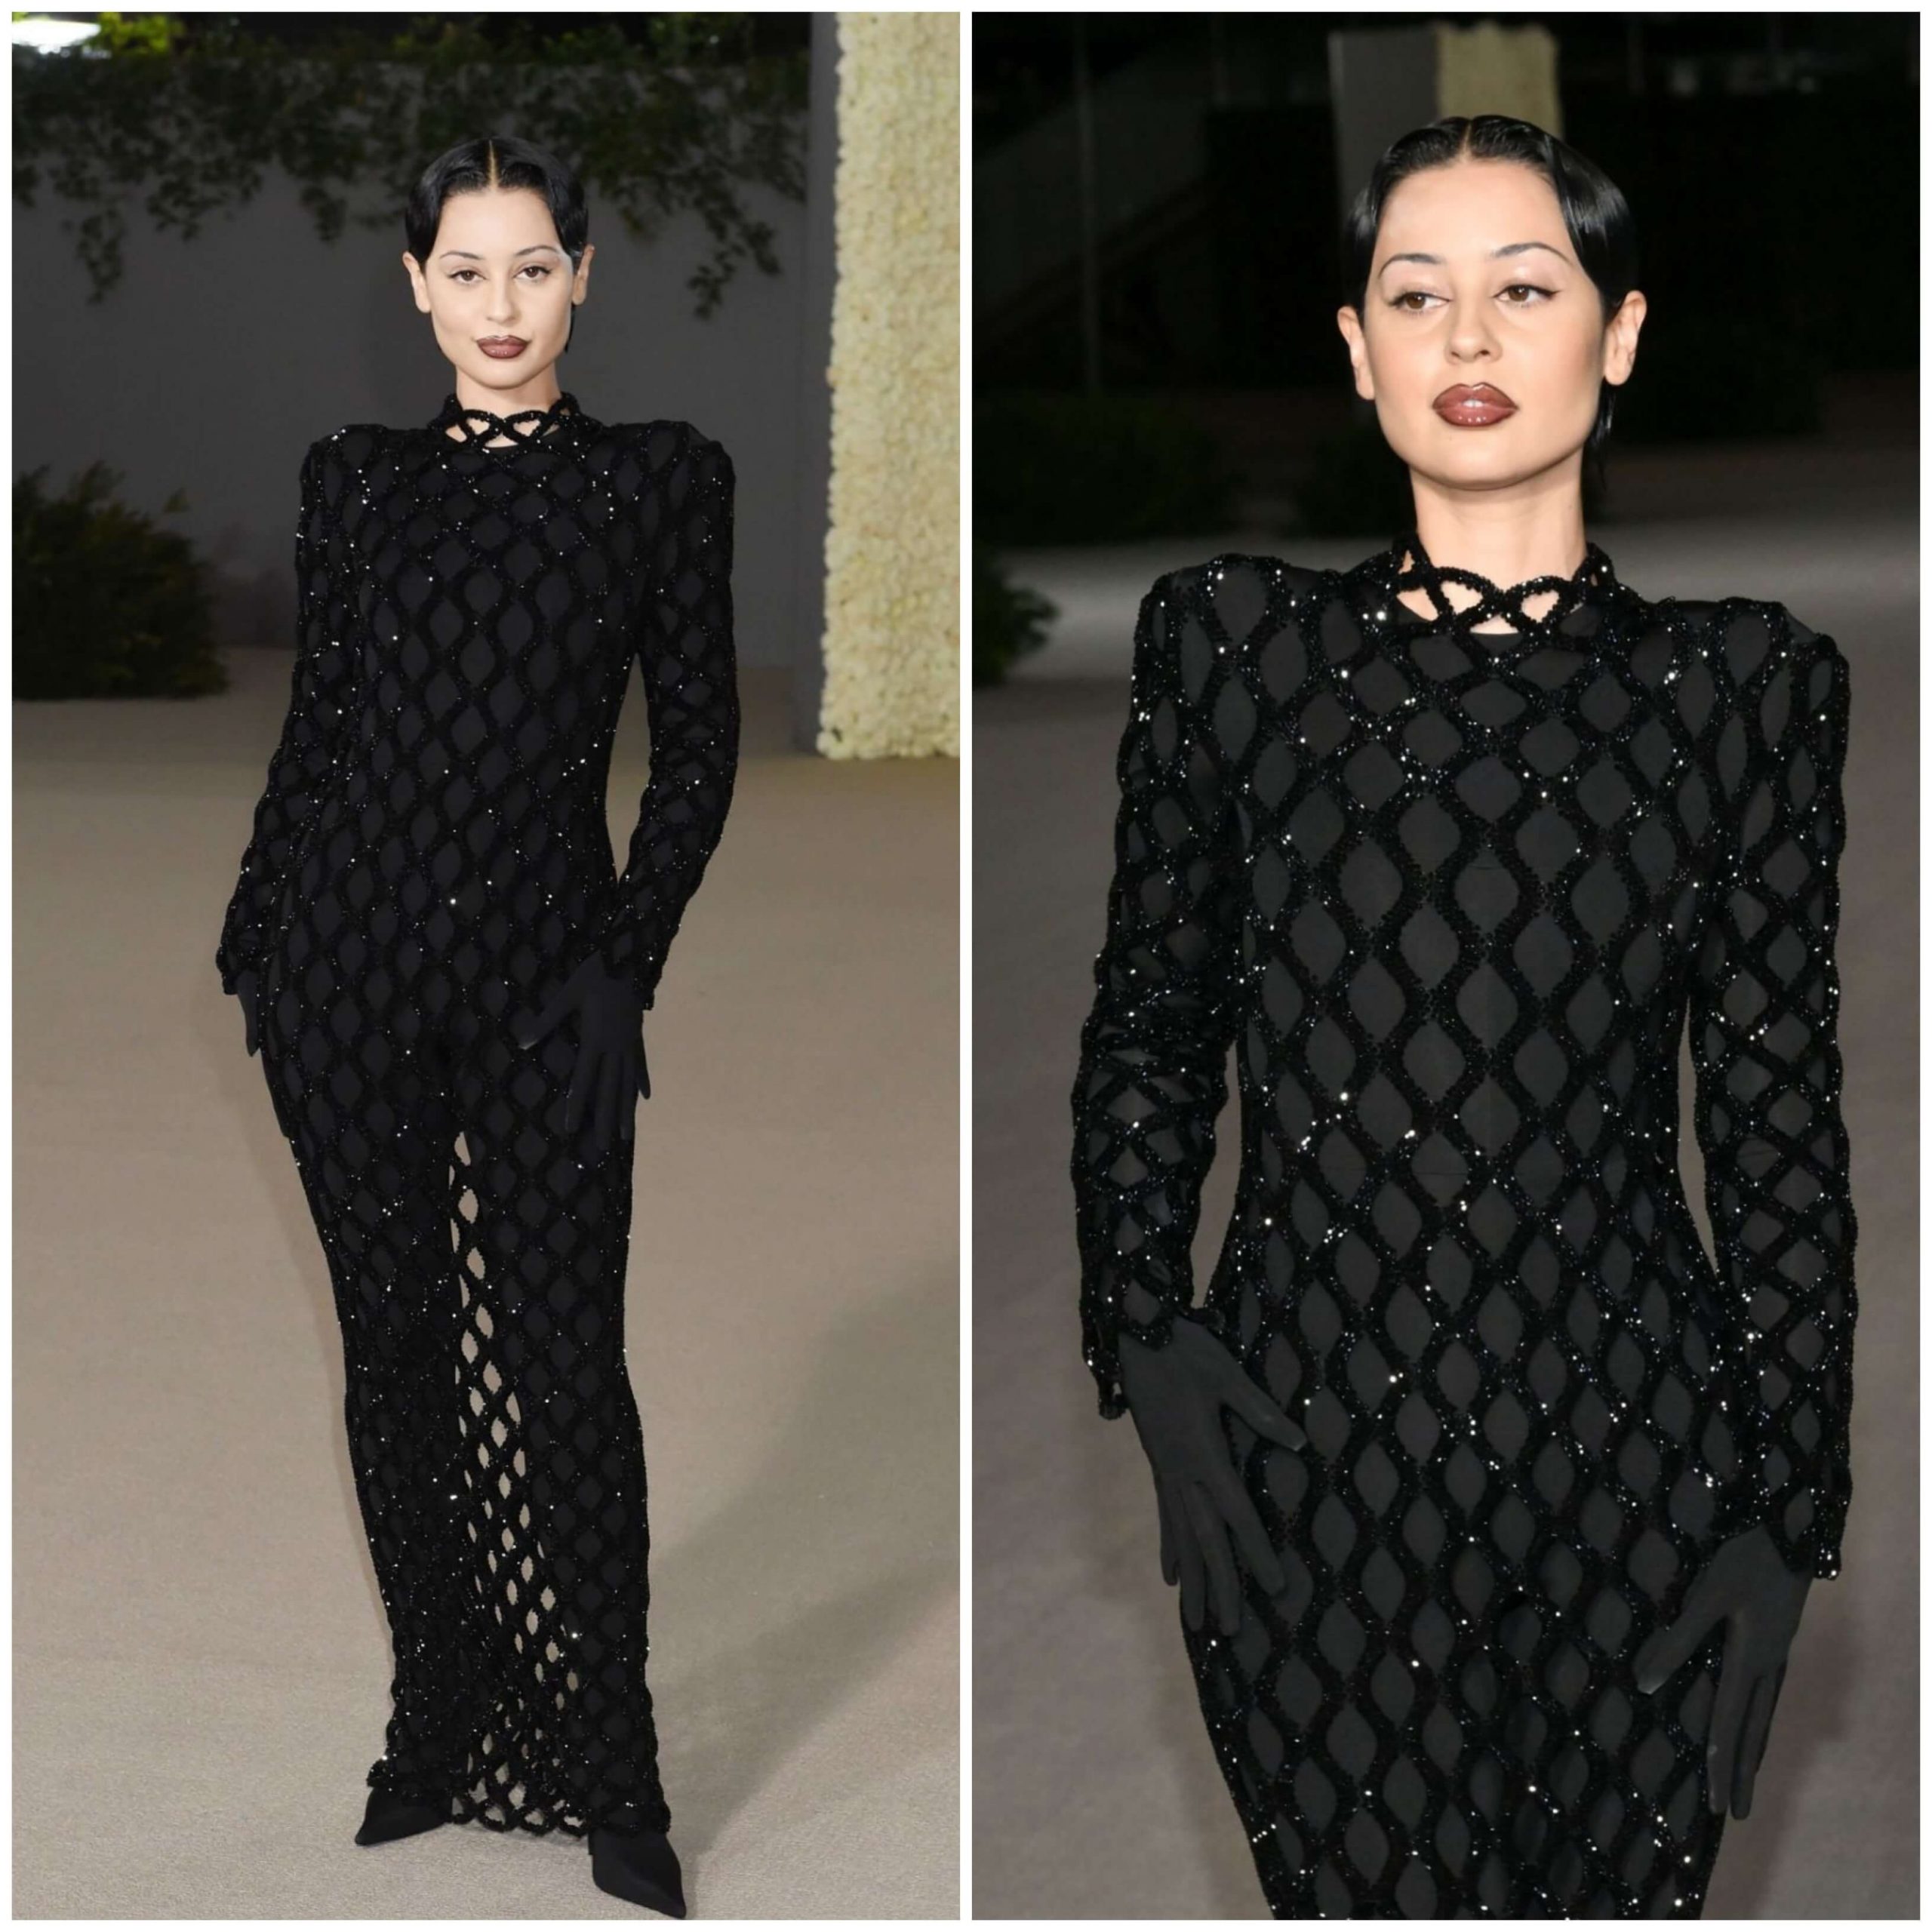 Alexa Demie – In Black Shiny Crochet Outfit - Academy Museum Gala in Los Angeles